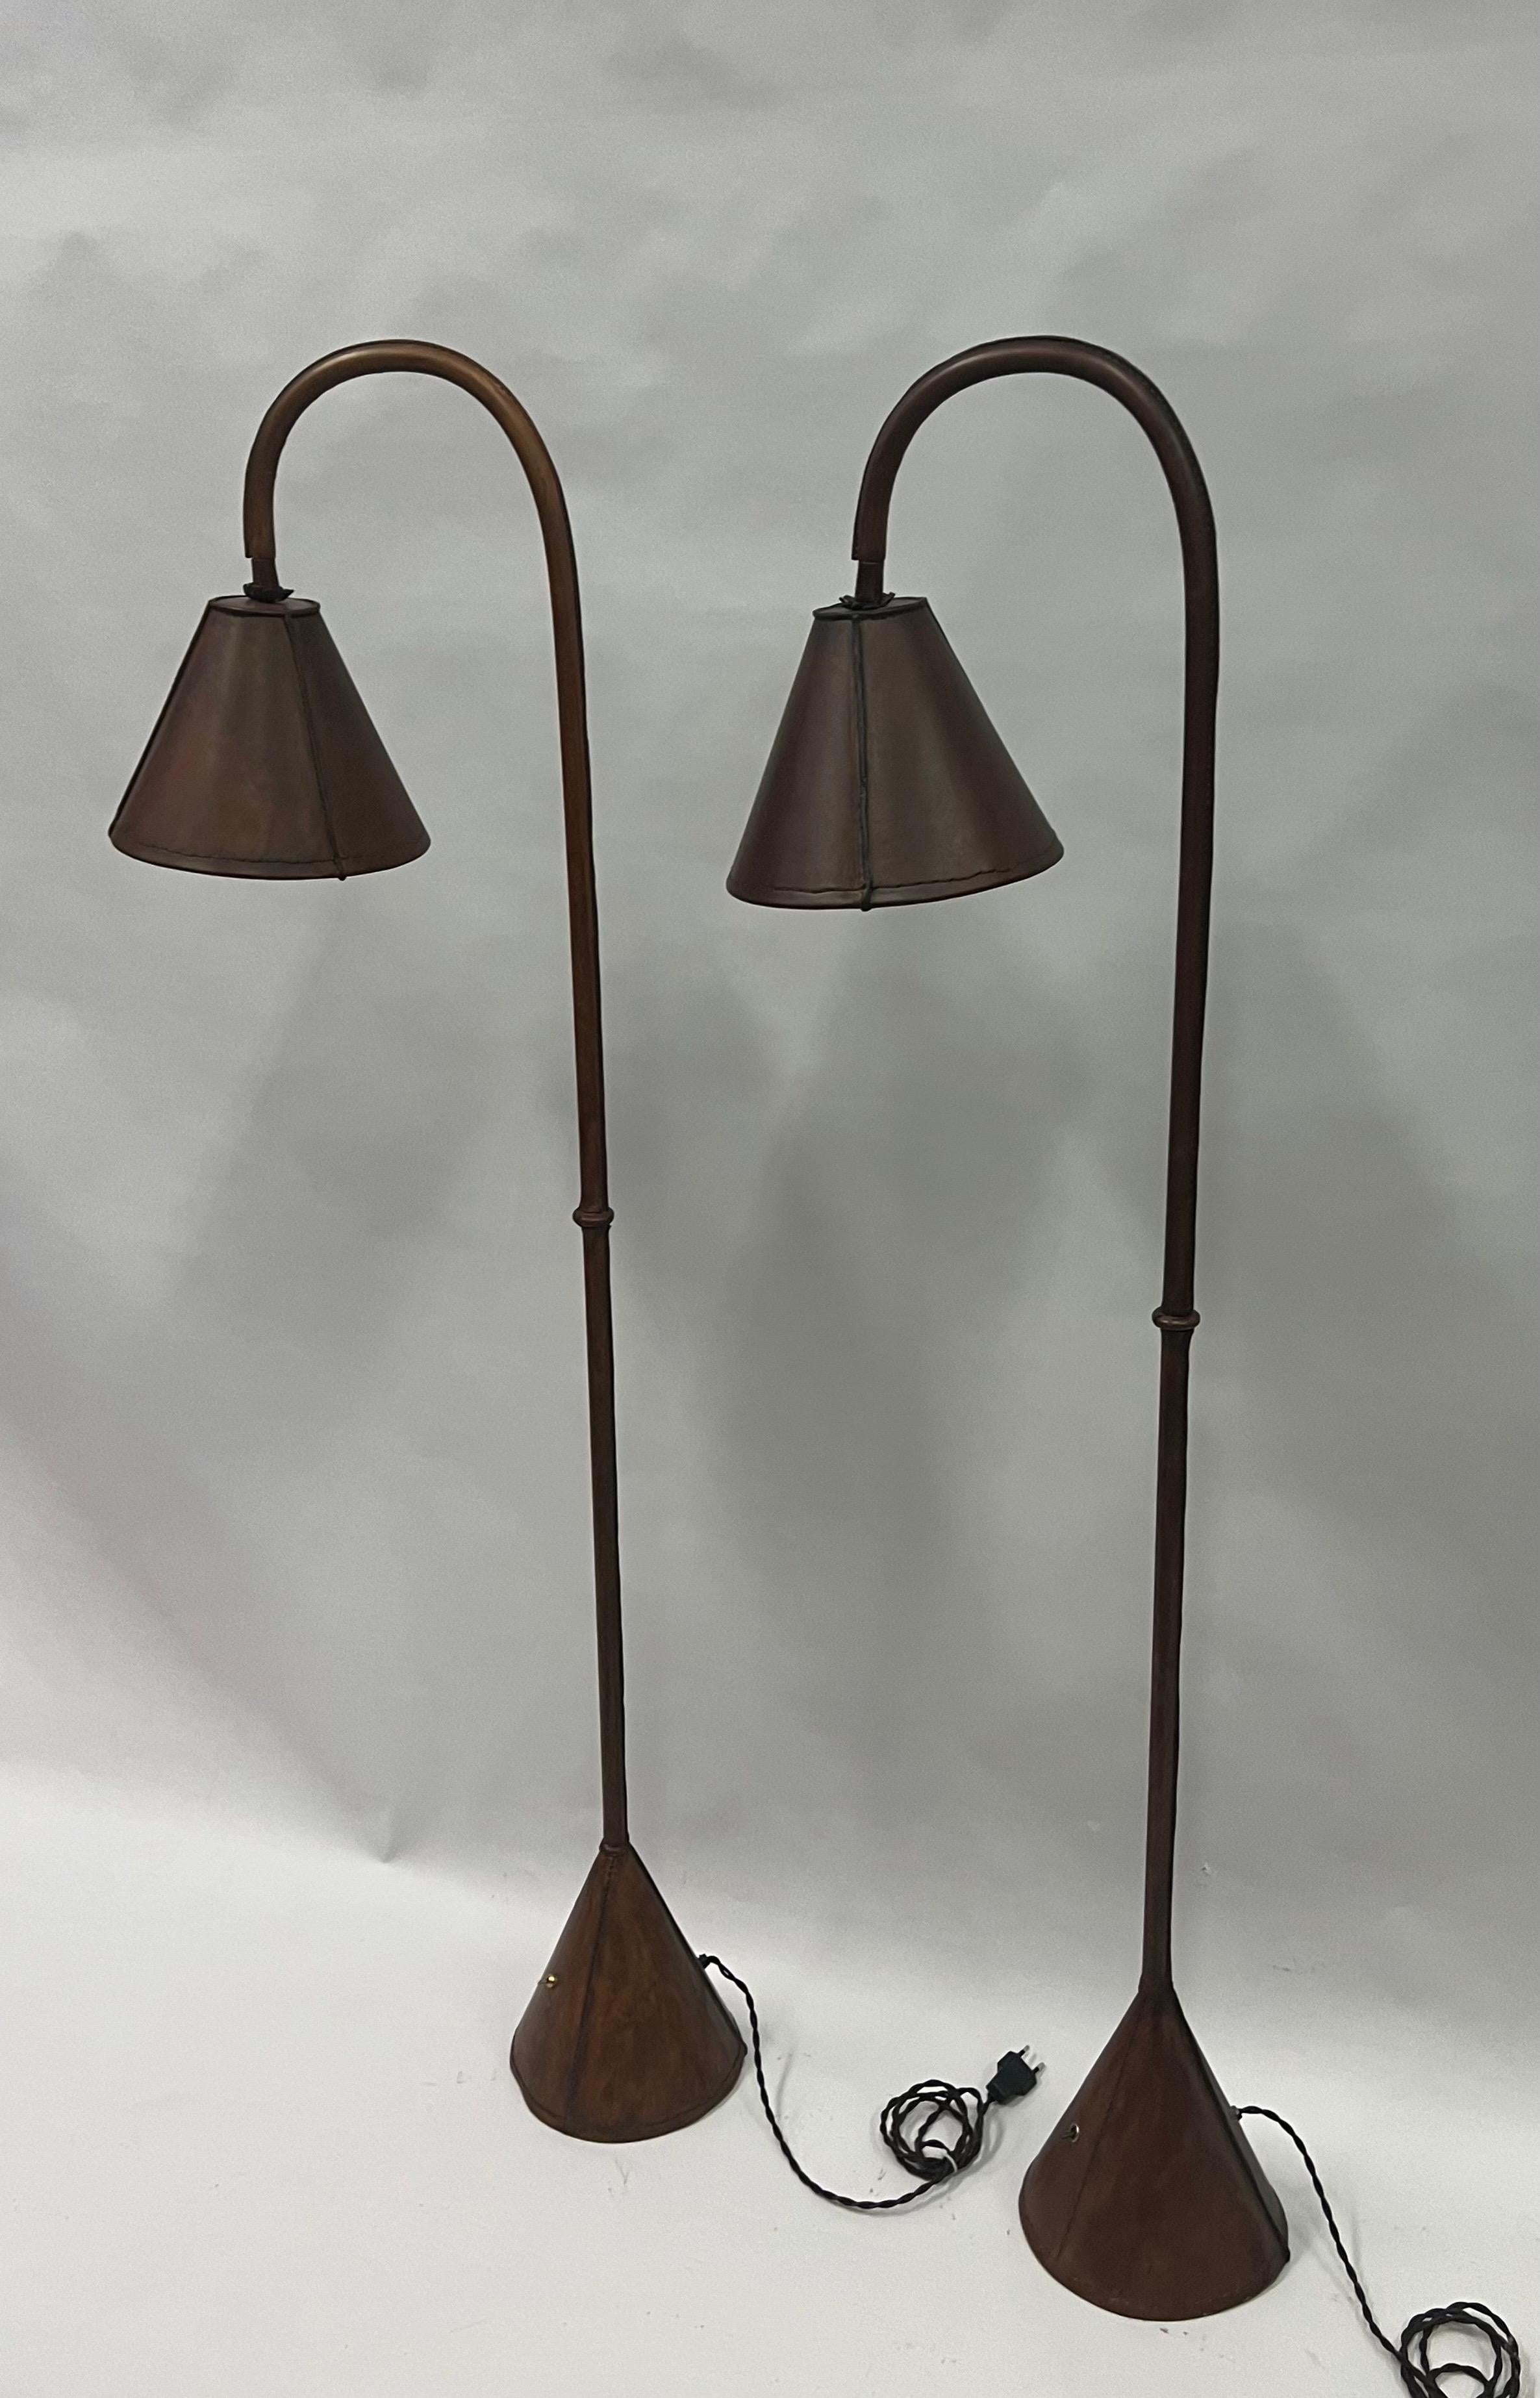 Elegant and Timeless Pair of French Mid-Century Modern Hand-Stitched Dark Brown Leather Floor Lamps by Jacques Adnet circa 1950. This classic hand made model from the renowned French designer, Jacques Adnet is sought after as an icon of design and